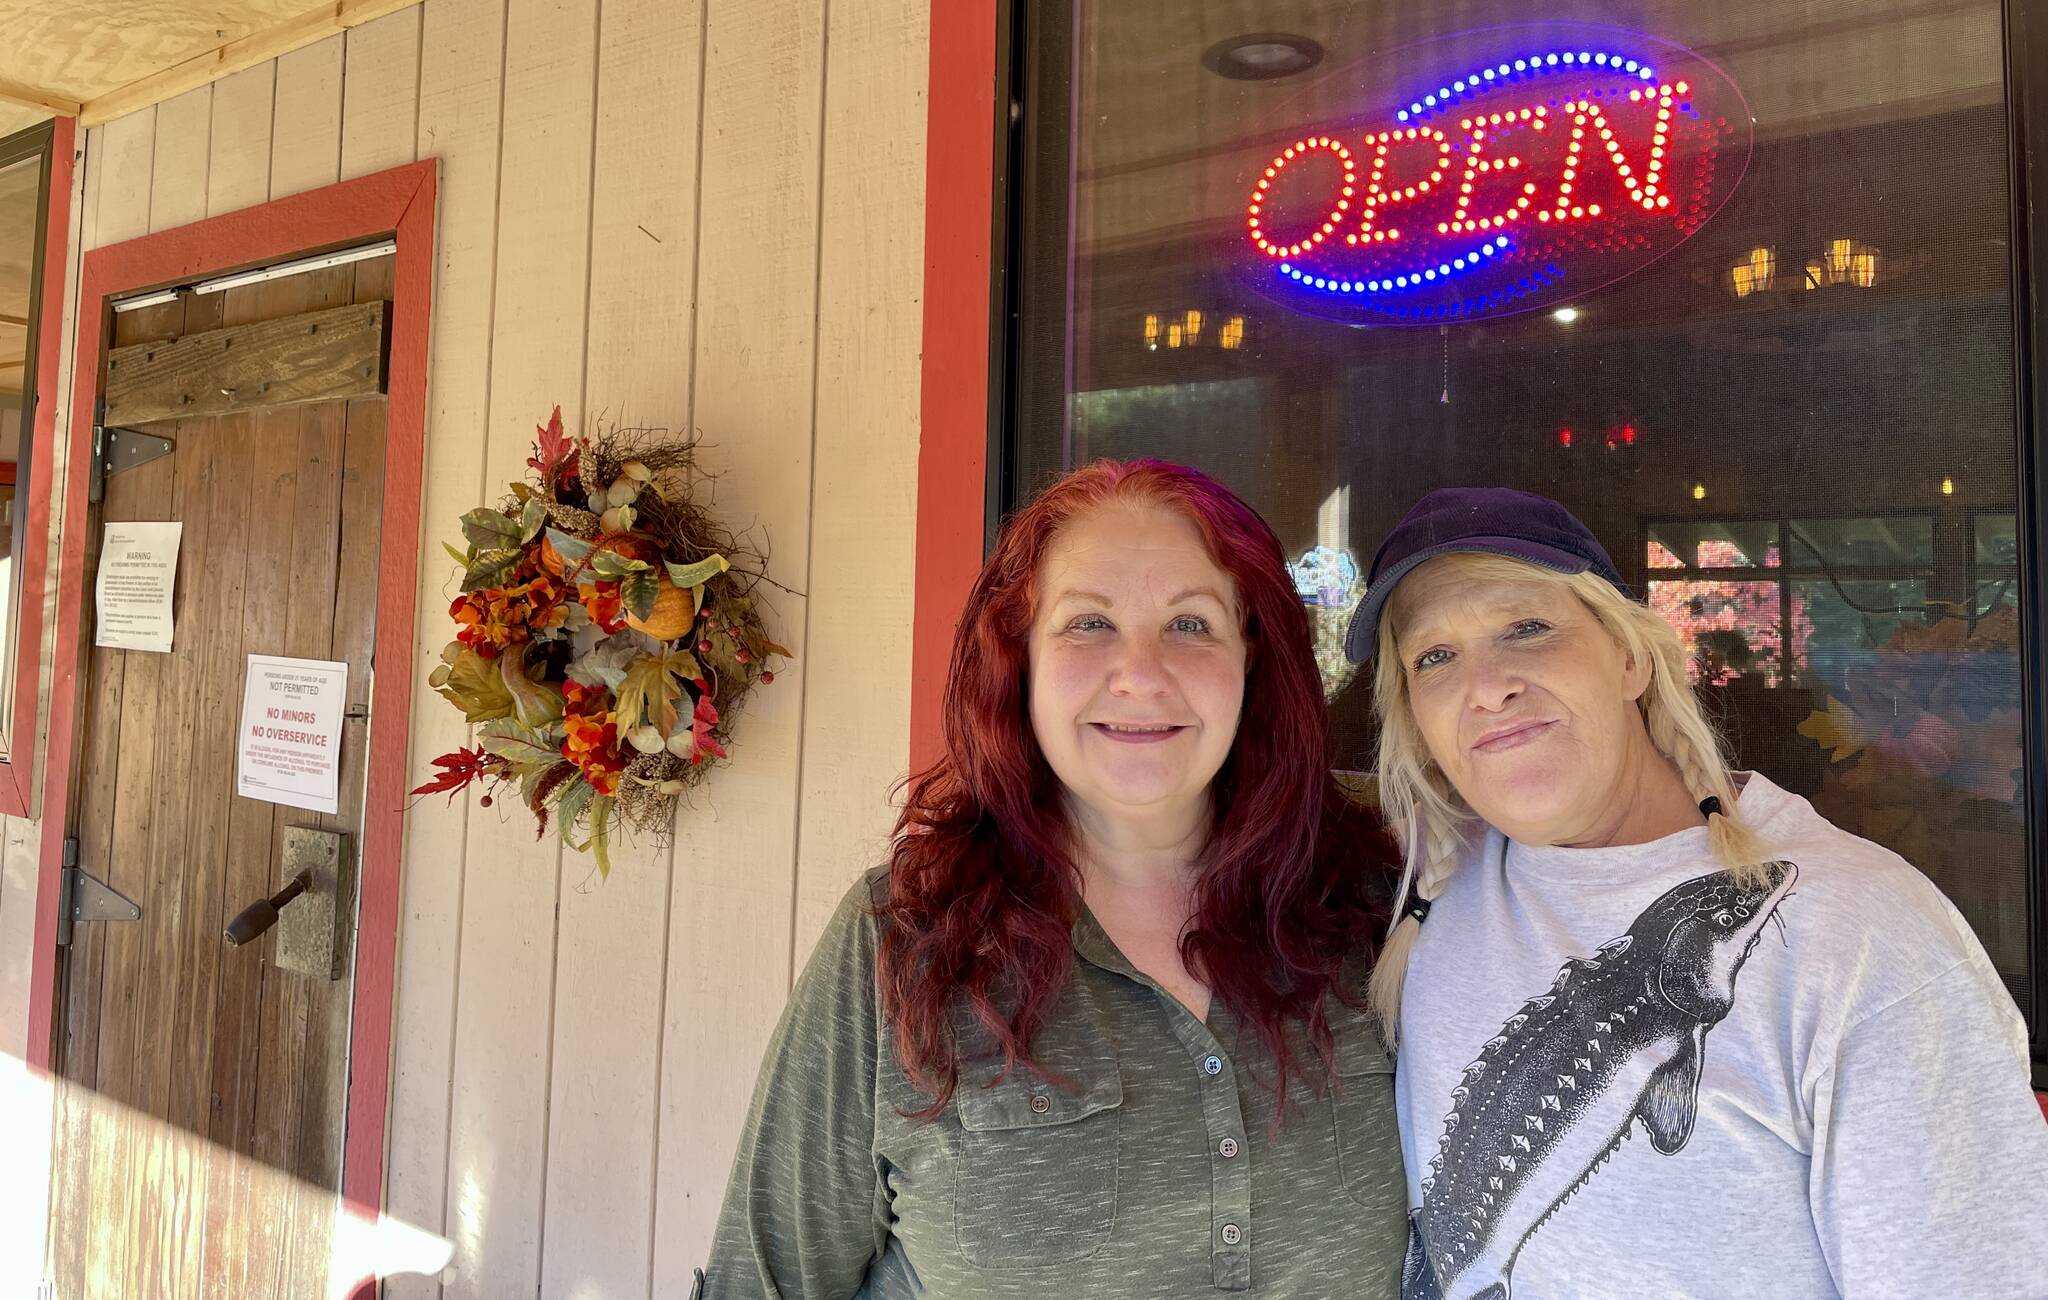 Michael S. Lockett / The Daily World
Artic Pub owner Lisa Loveday, center, and longtime bartender Jackie Duncan smile outside the bar, recently reopened following a major fire.